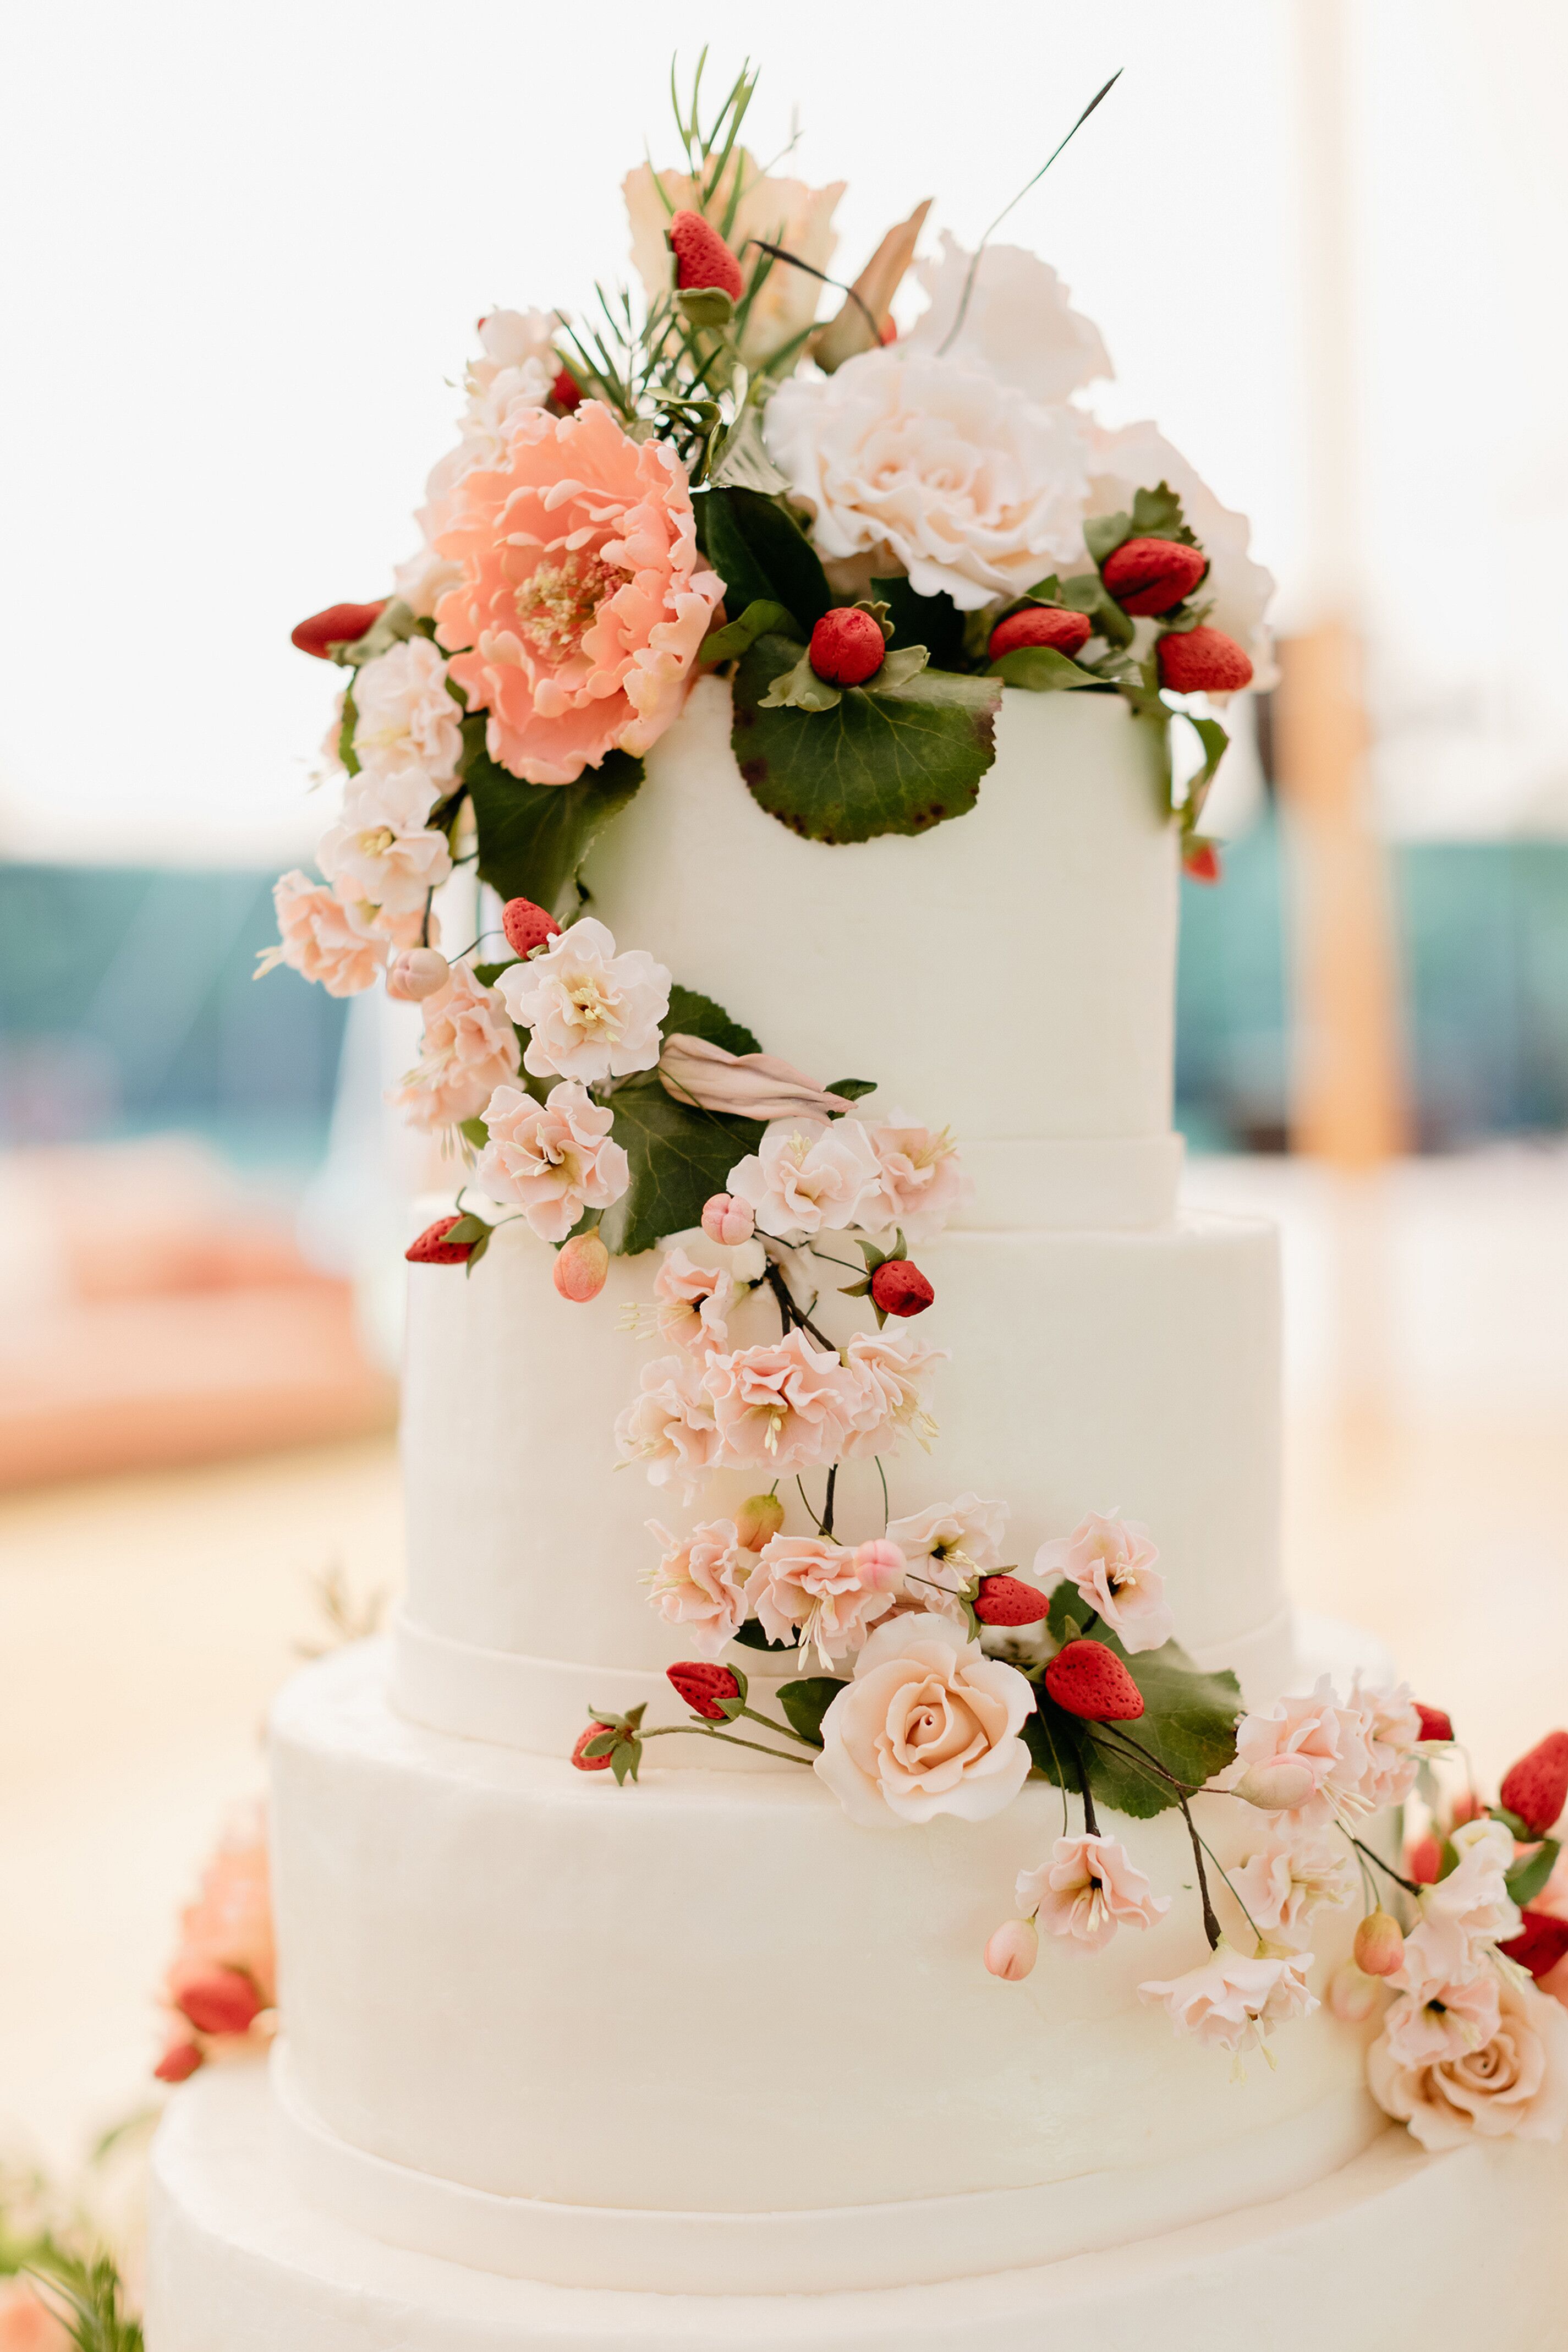 Luxury Flower Arrangement with Cake and Cake Stand – Misses Sweet